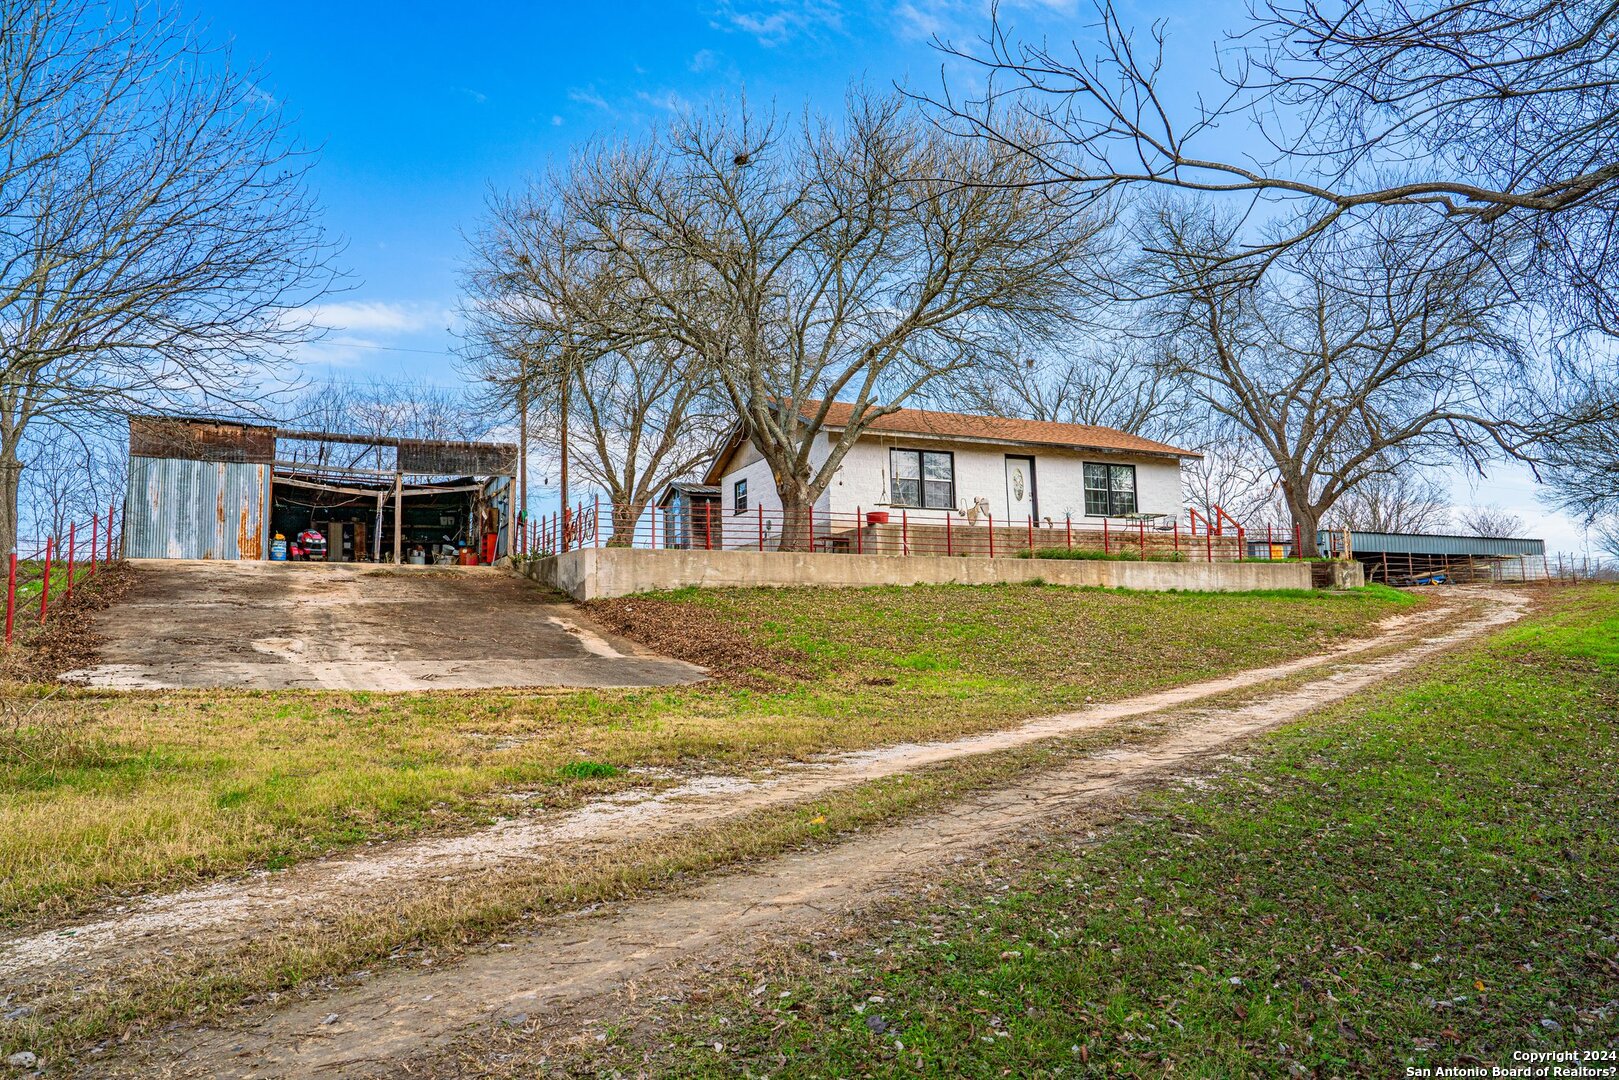 Photo of 395 Private Rd 4771 in Castroville, TX